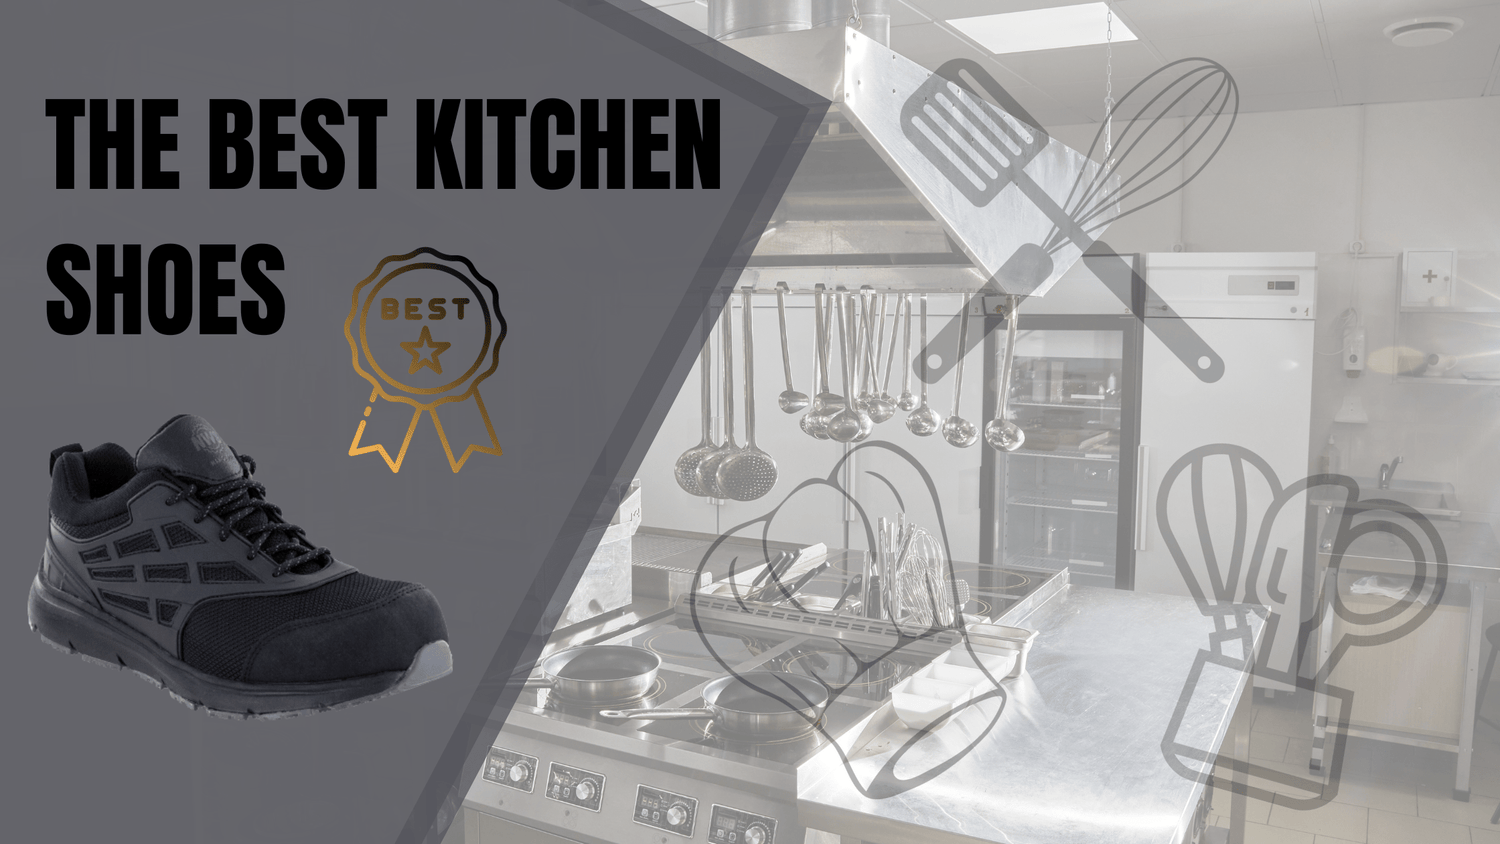 Kitchen Work Shoes and Chef Shoes: Which are Best?